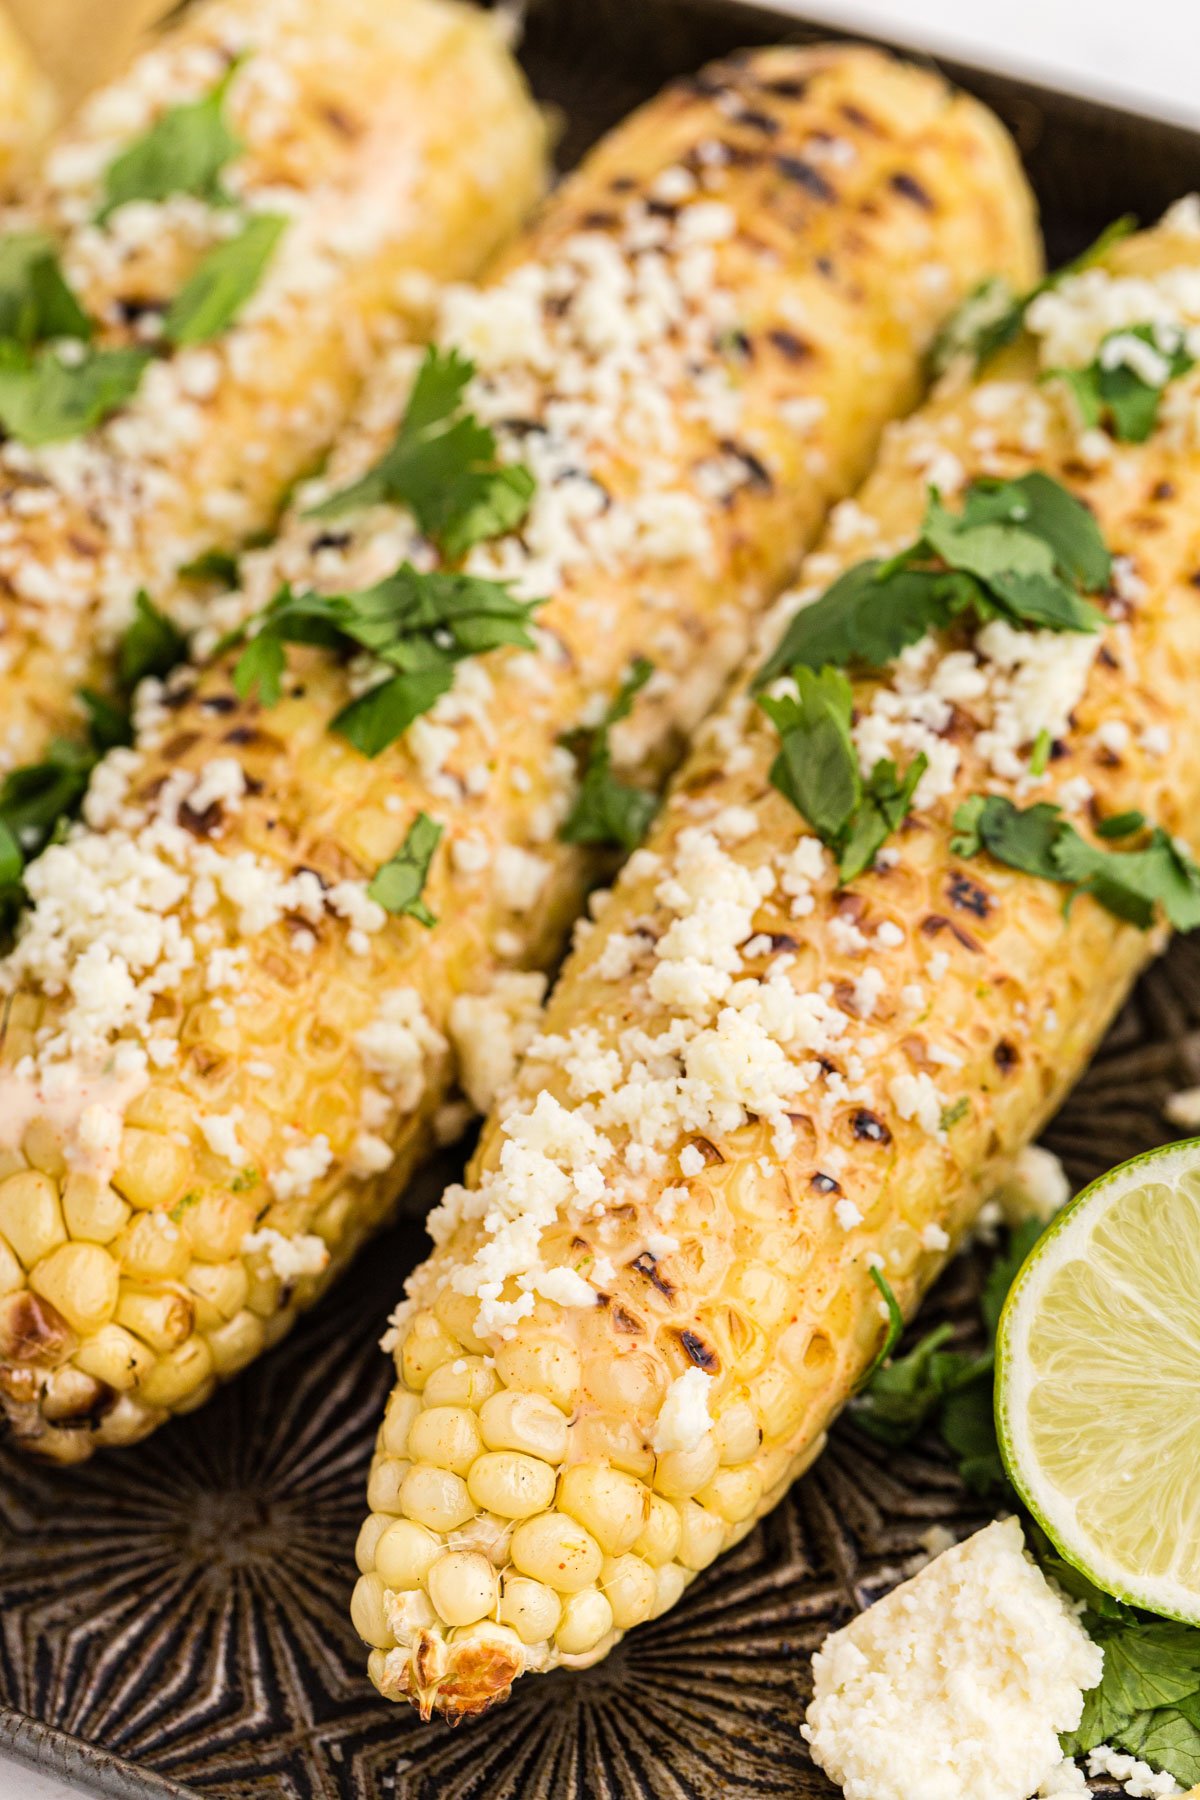 Grilled Mexican Street Corn with cilantro and crumbled cheese garnish, on baking sheet, limes on side